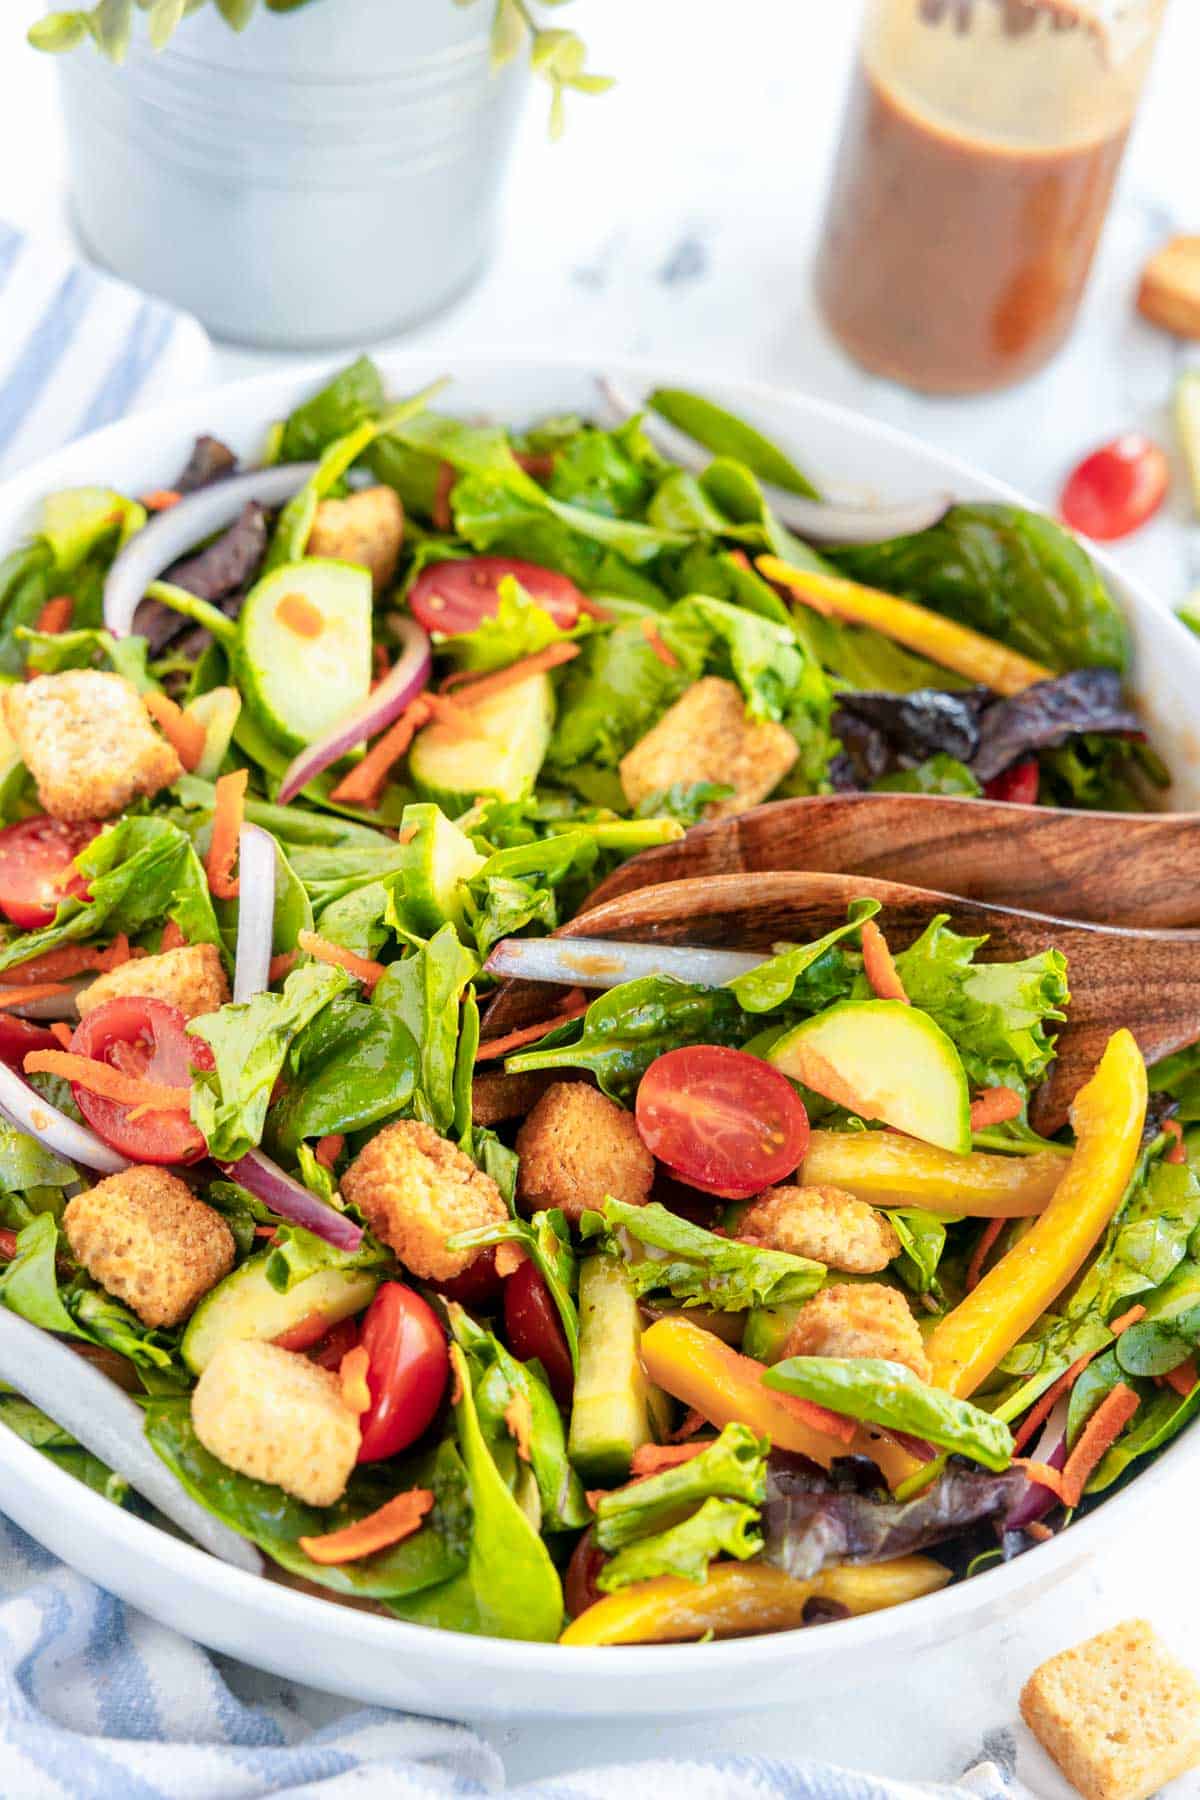 Garden salad with fresh vegetables and crunchy croutons, served in a clean white bowl with wooden salad servers.